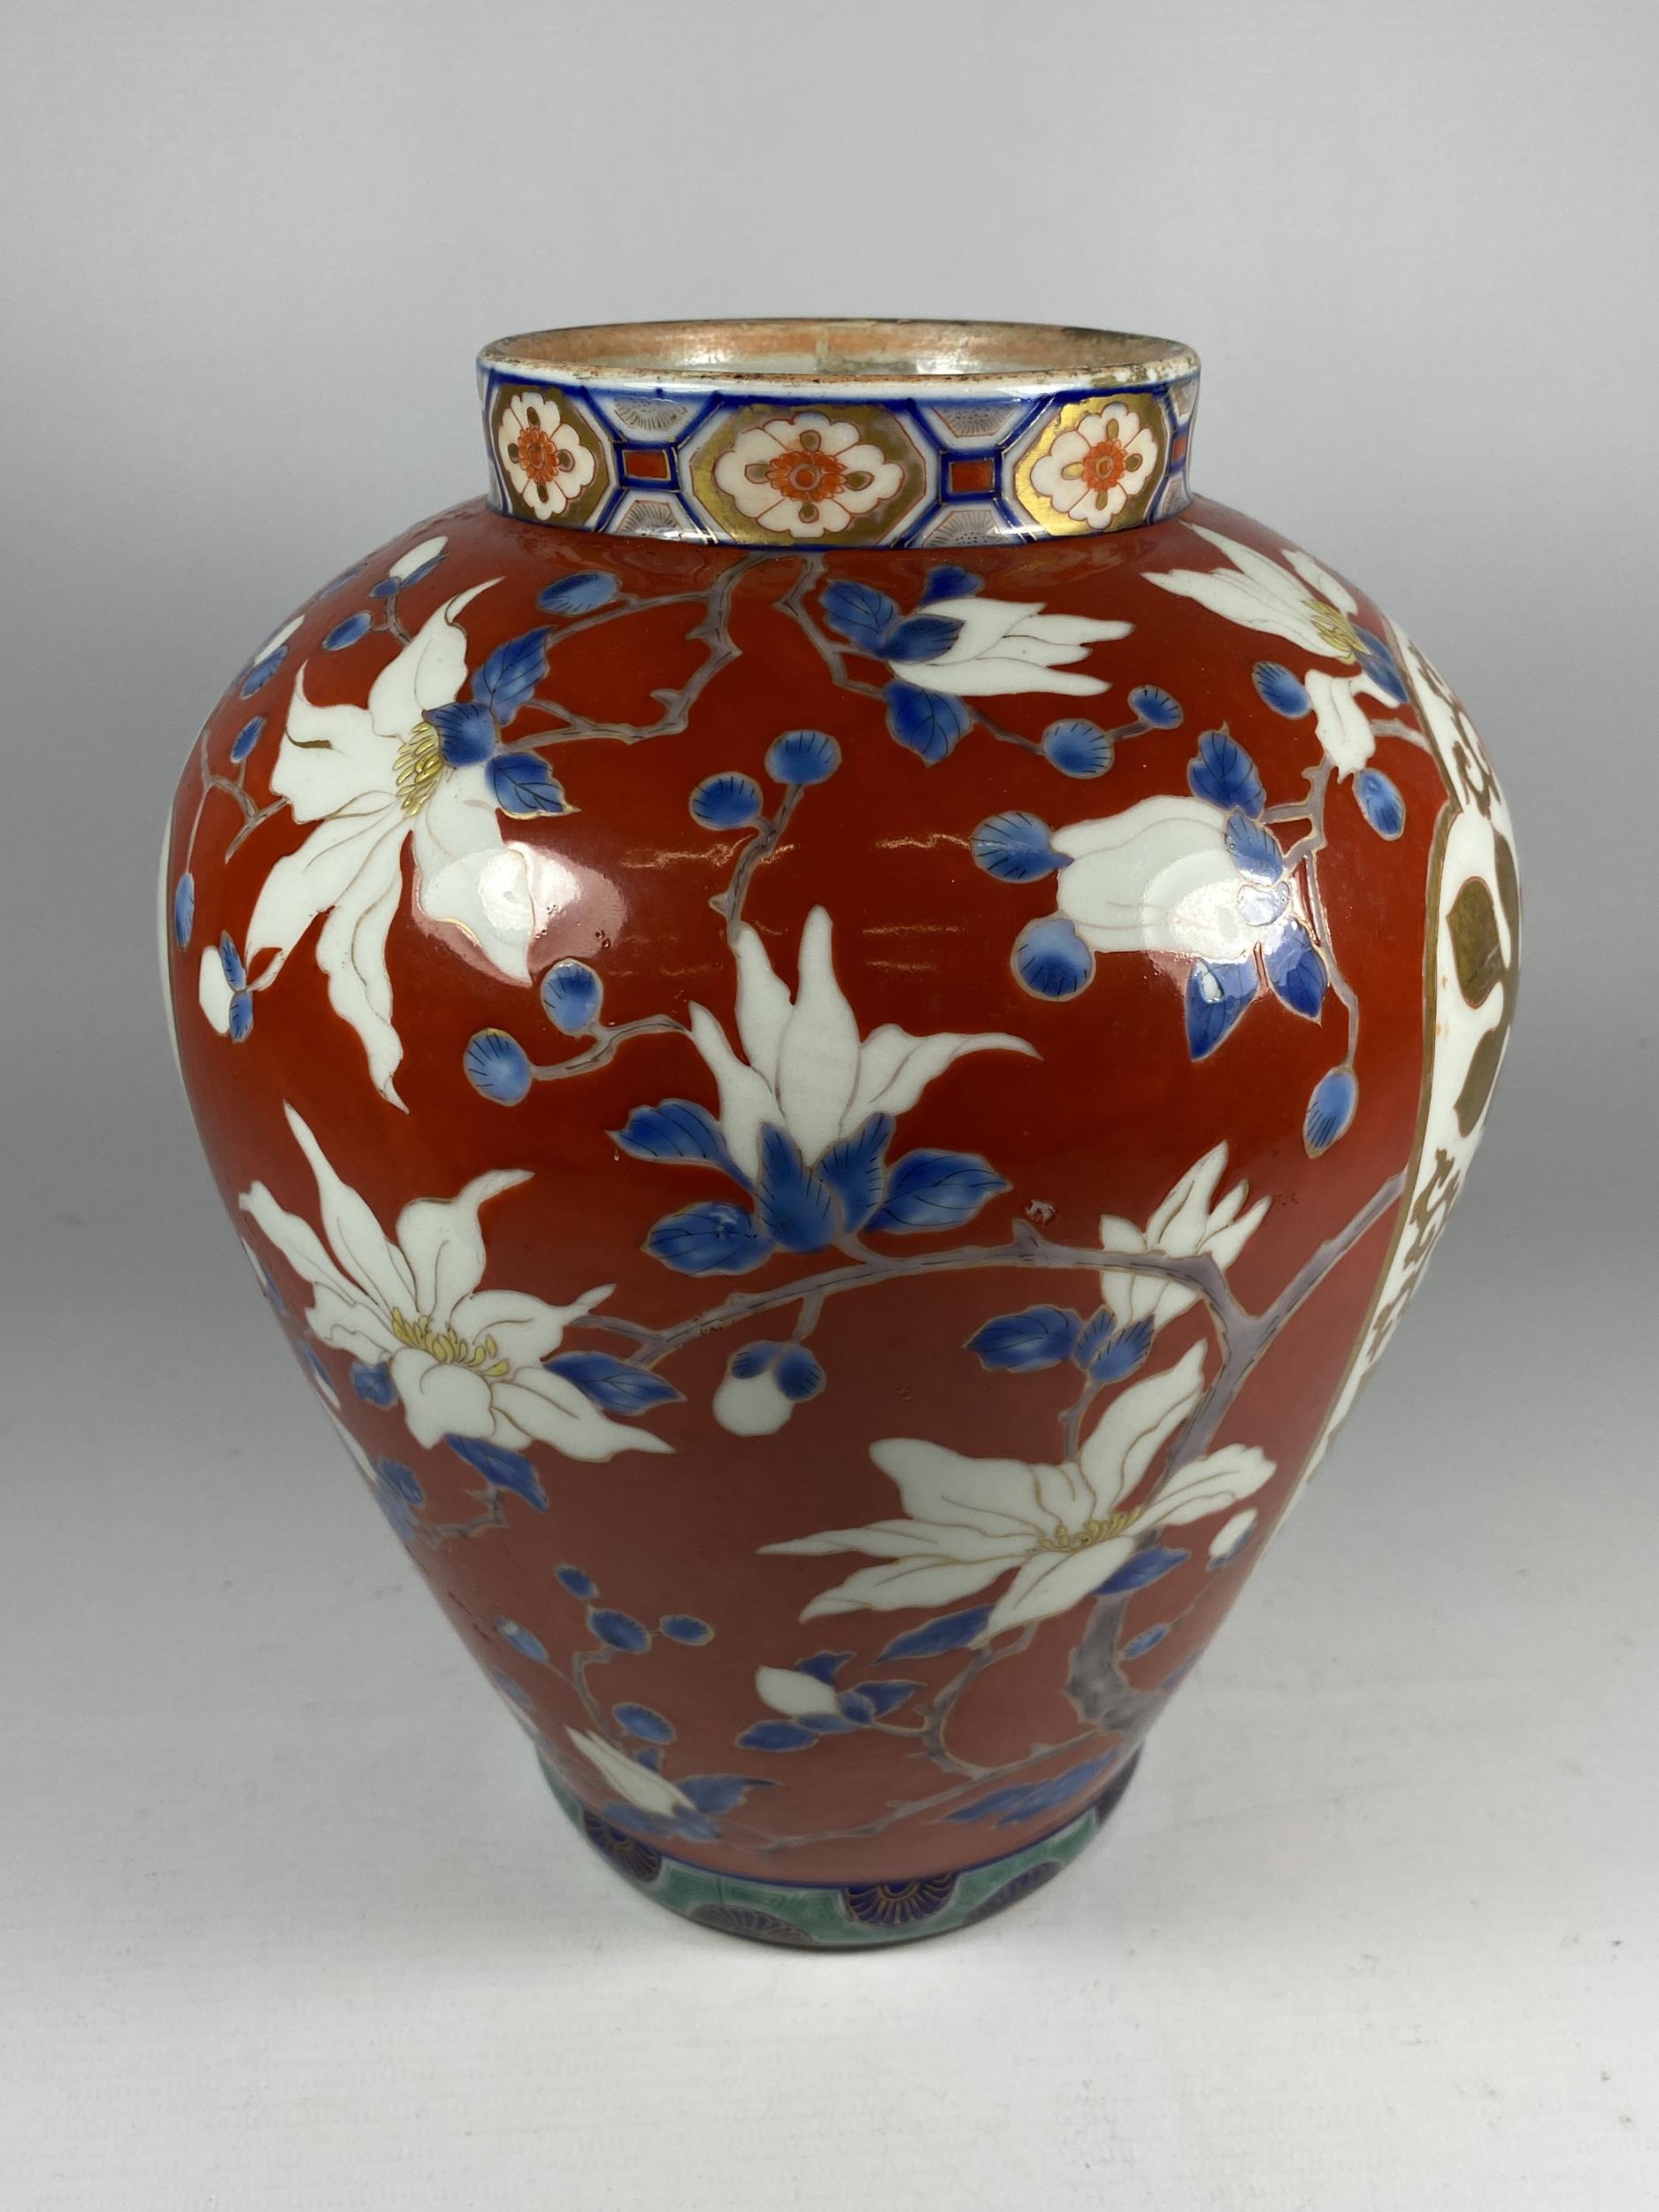 A LARGE JAPANESE MEIJI PERIOD (1868-1912) OVOID FORM WITH RED ENAMEL AND FLORAL DESIGN, HEIGHT 24CM - Image 2 of 6